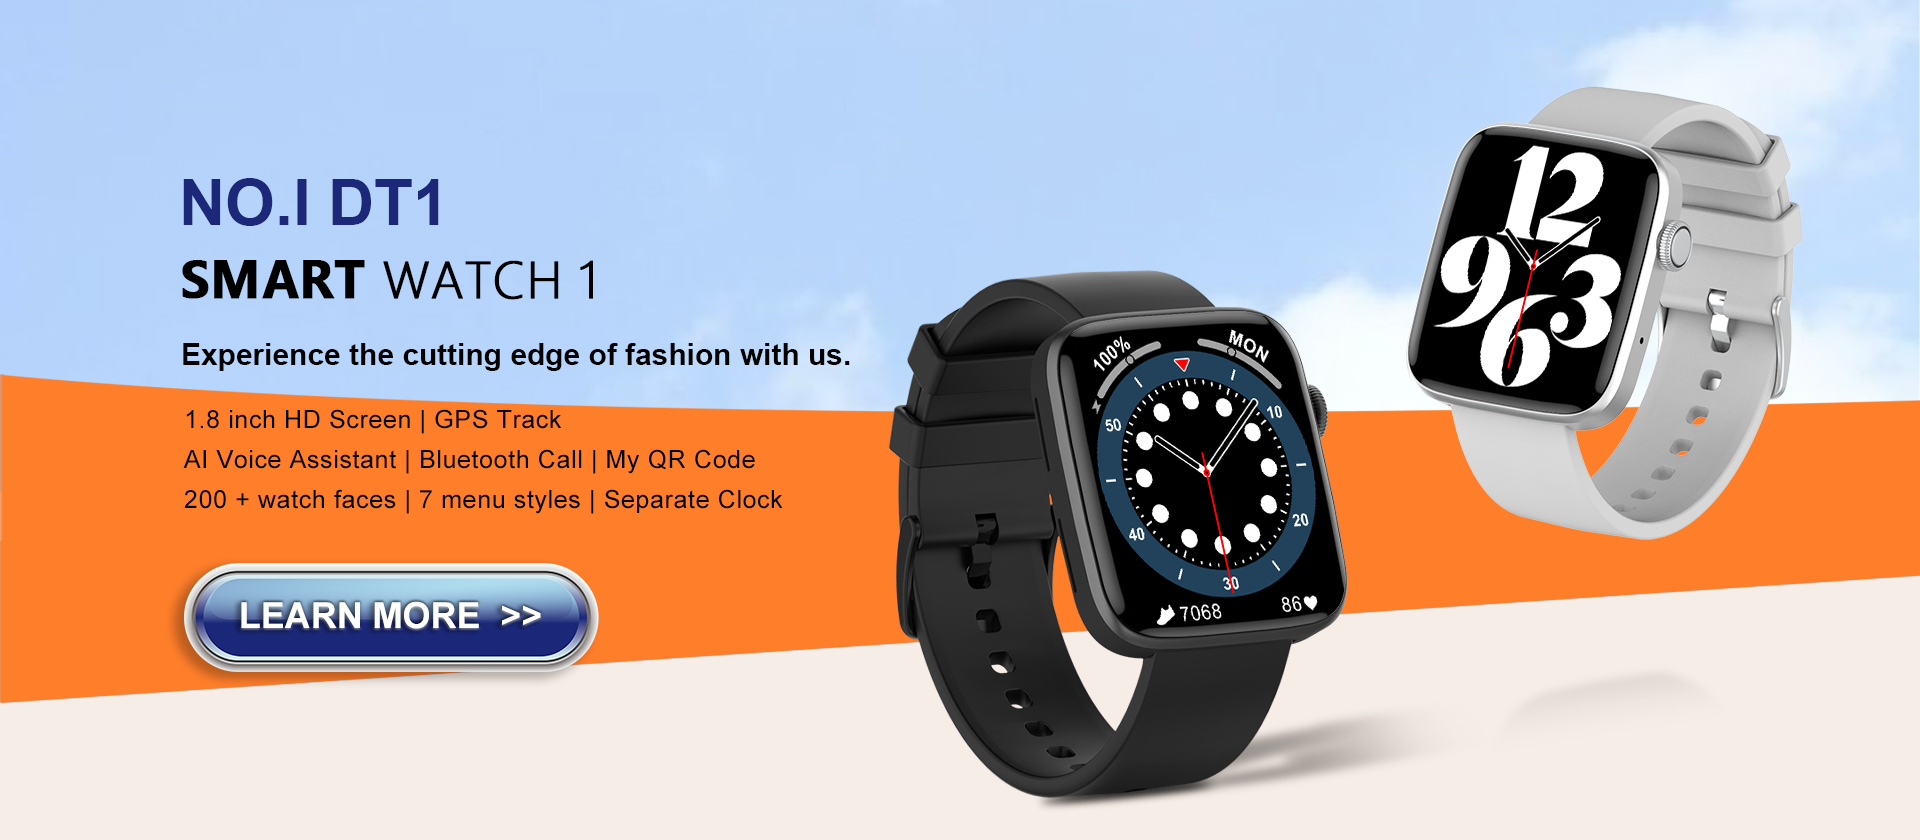 1.8-inch high-definition screen | Rotary button Bluetooth call | Password protection smartwatch dt1